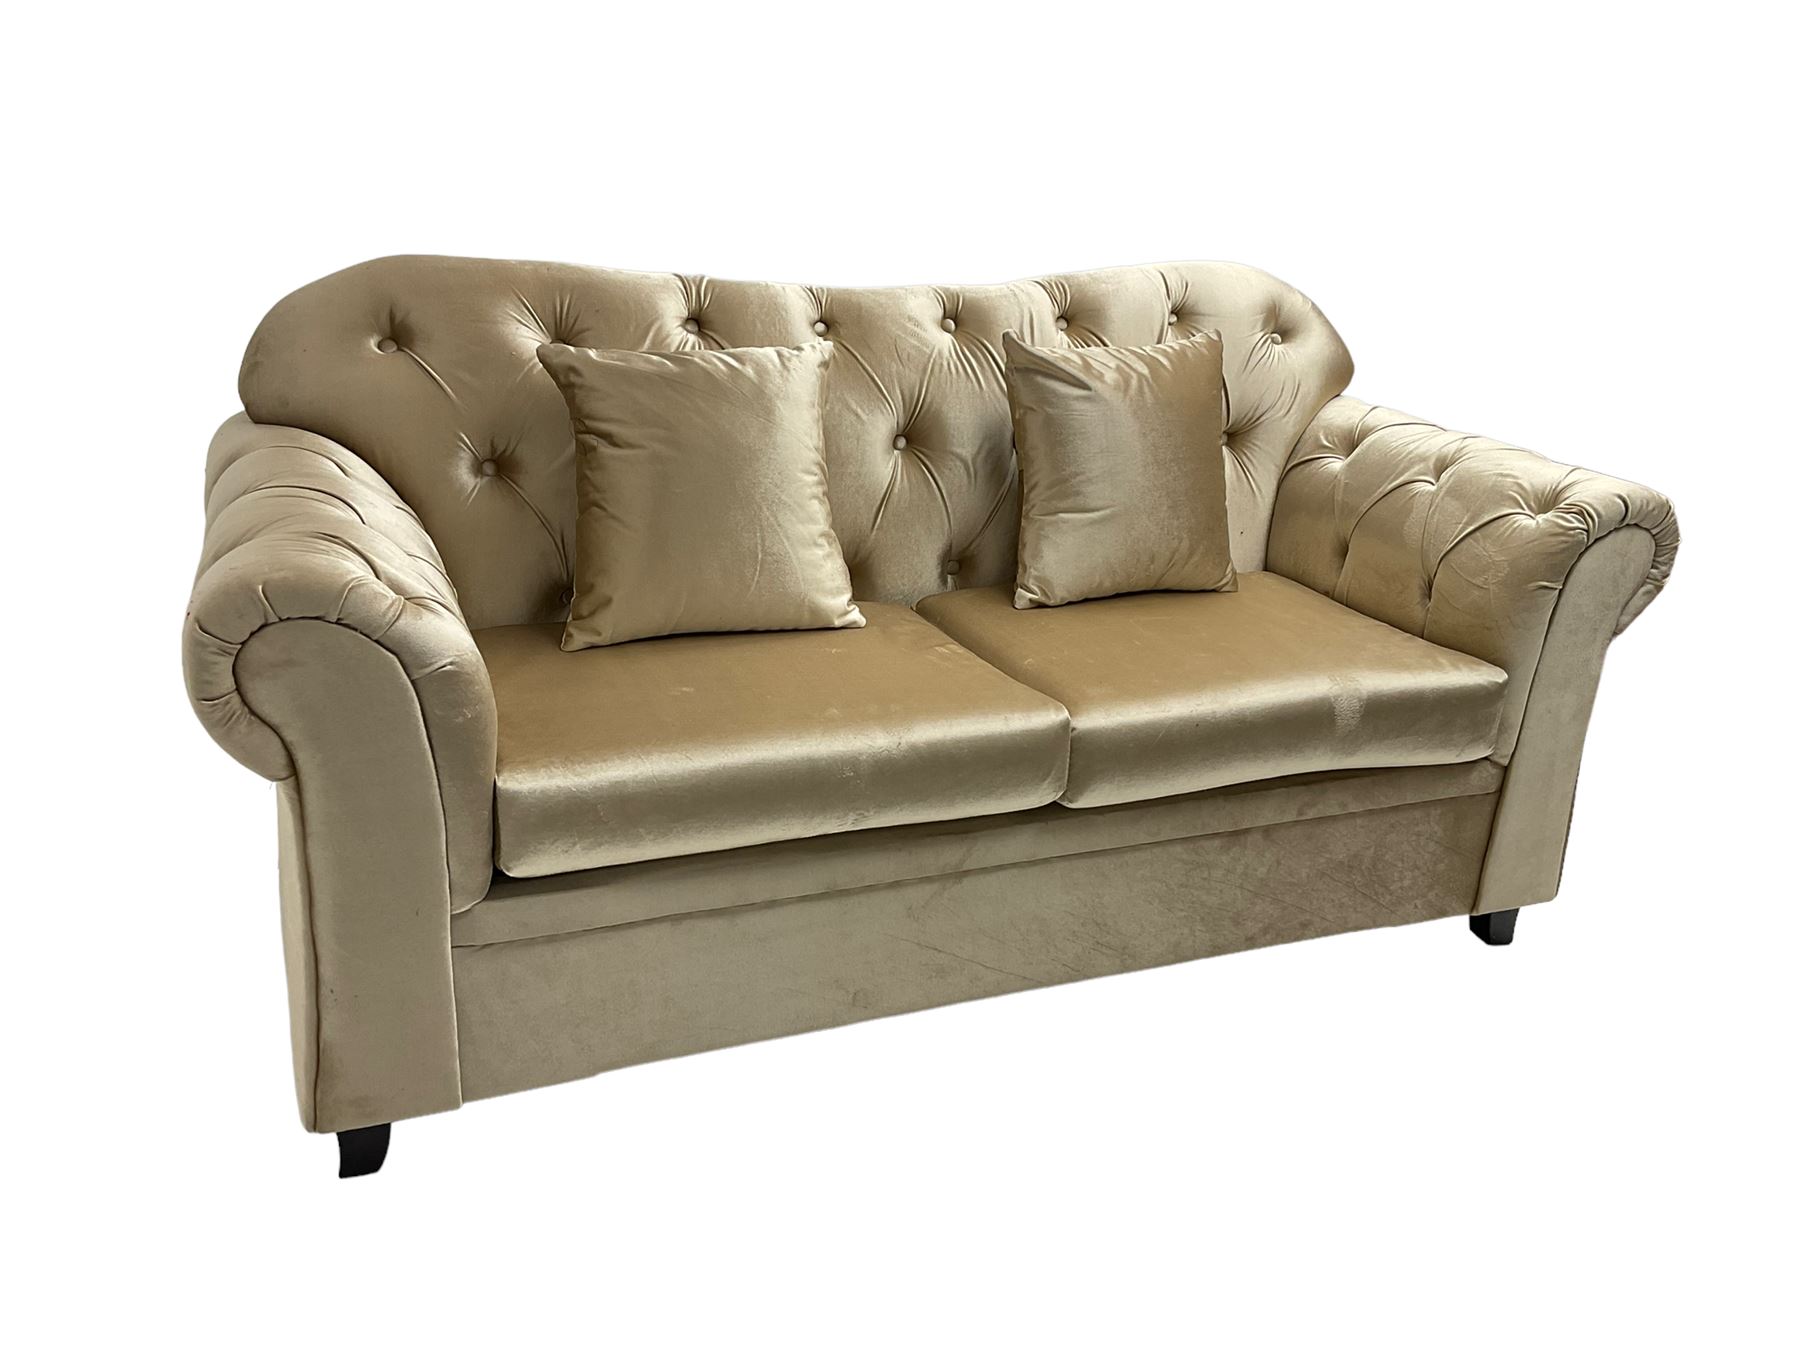 Chesterfield shaped two seat sofa - Image 5 of 6